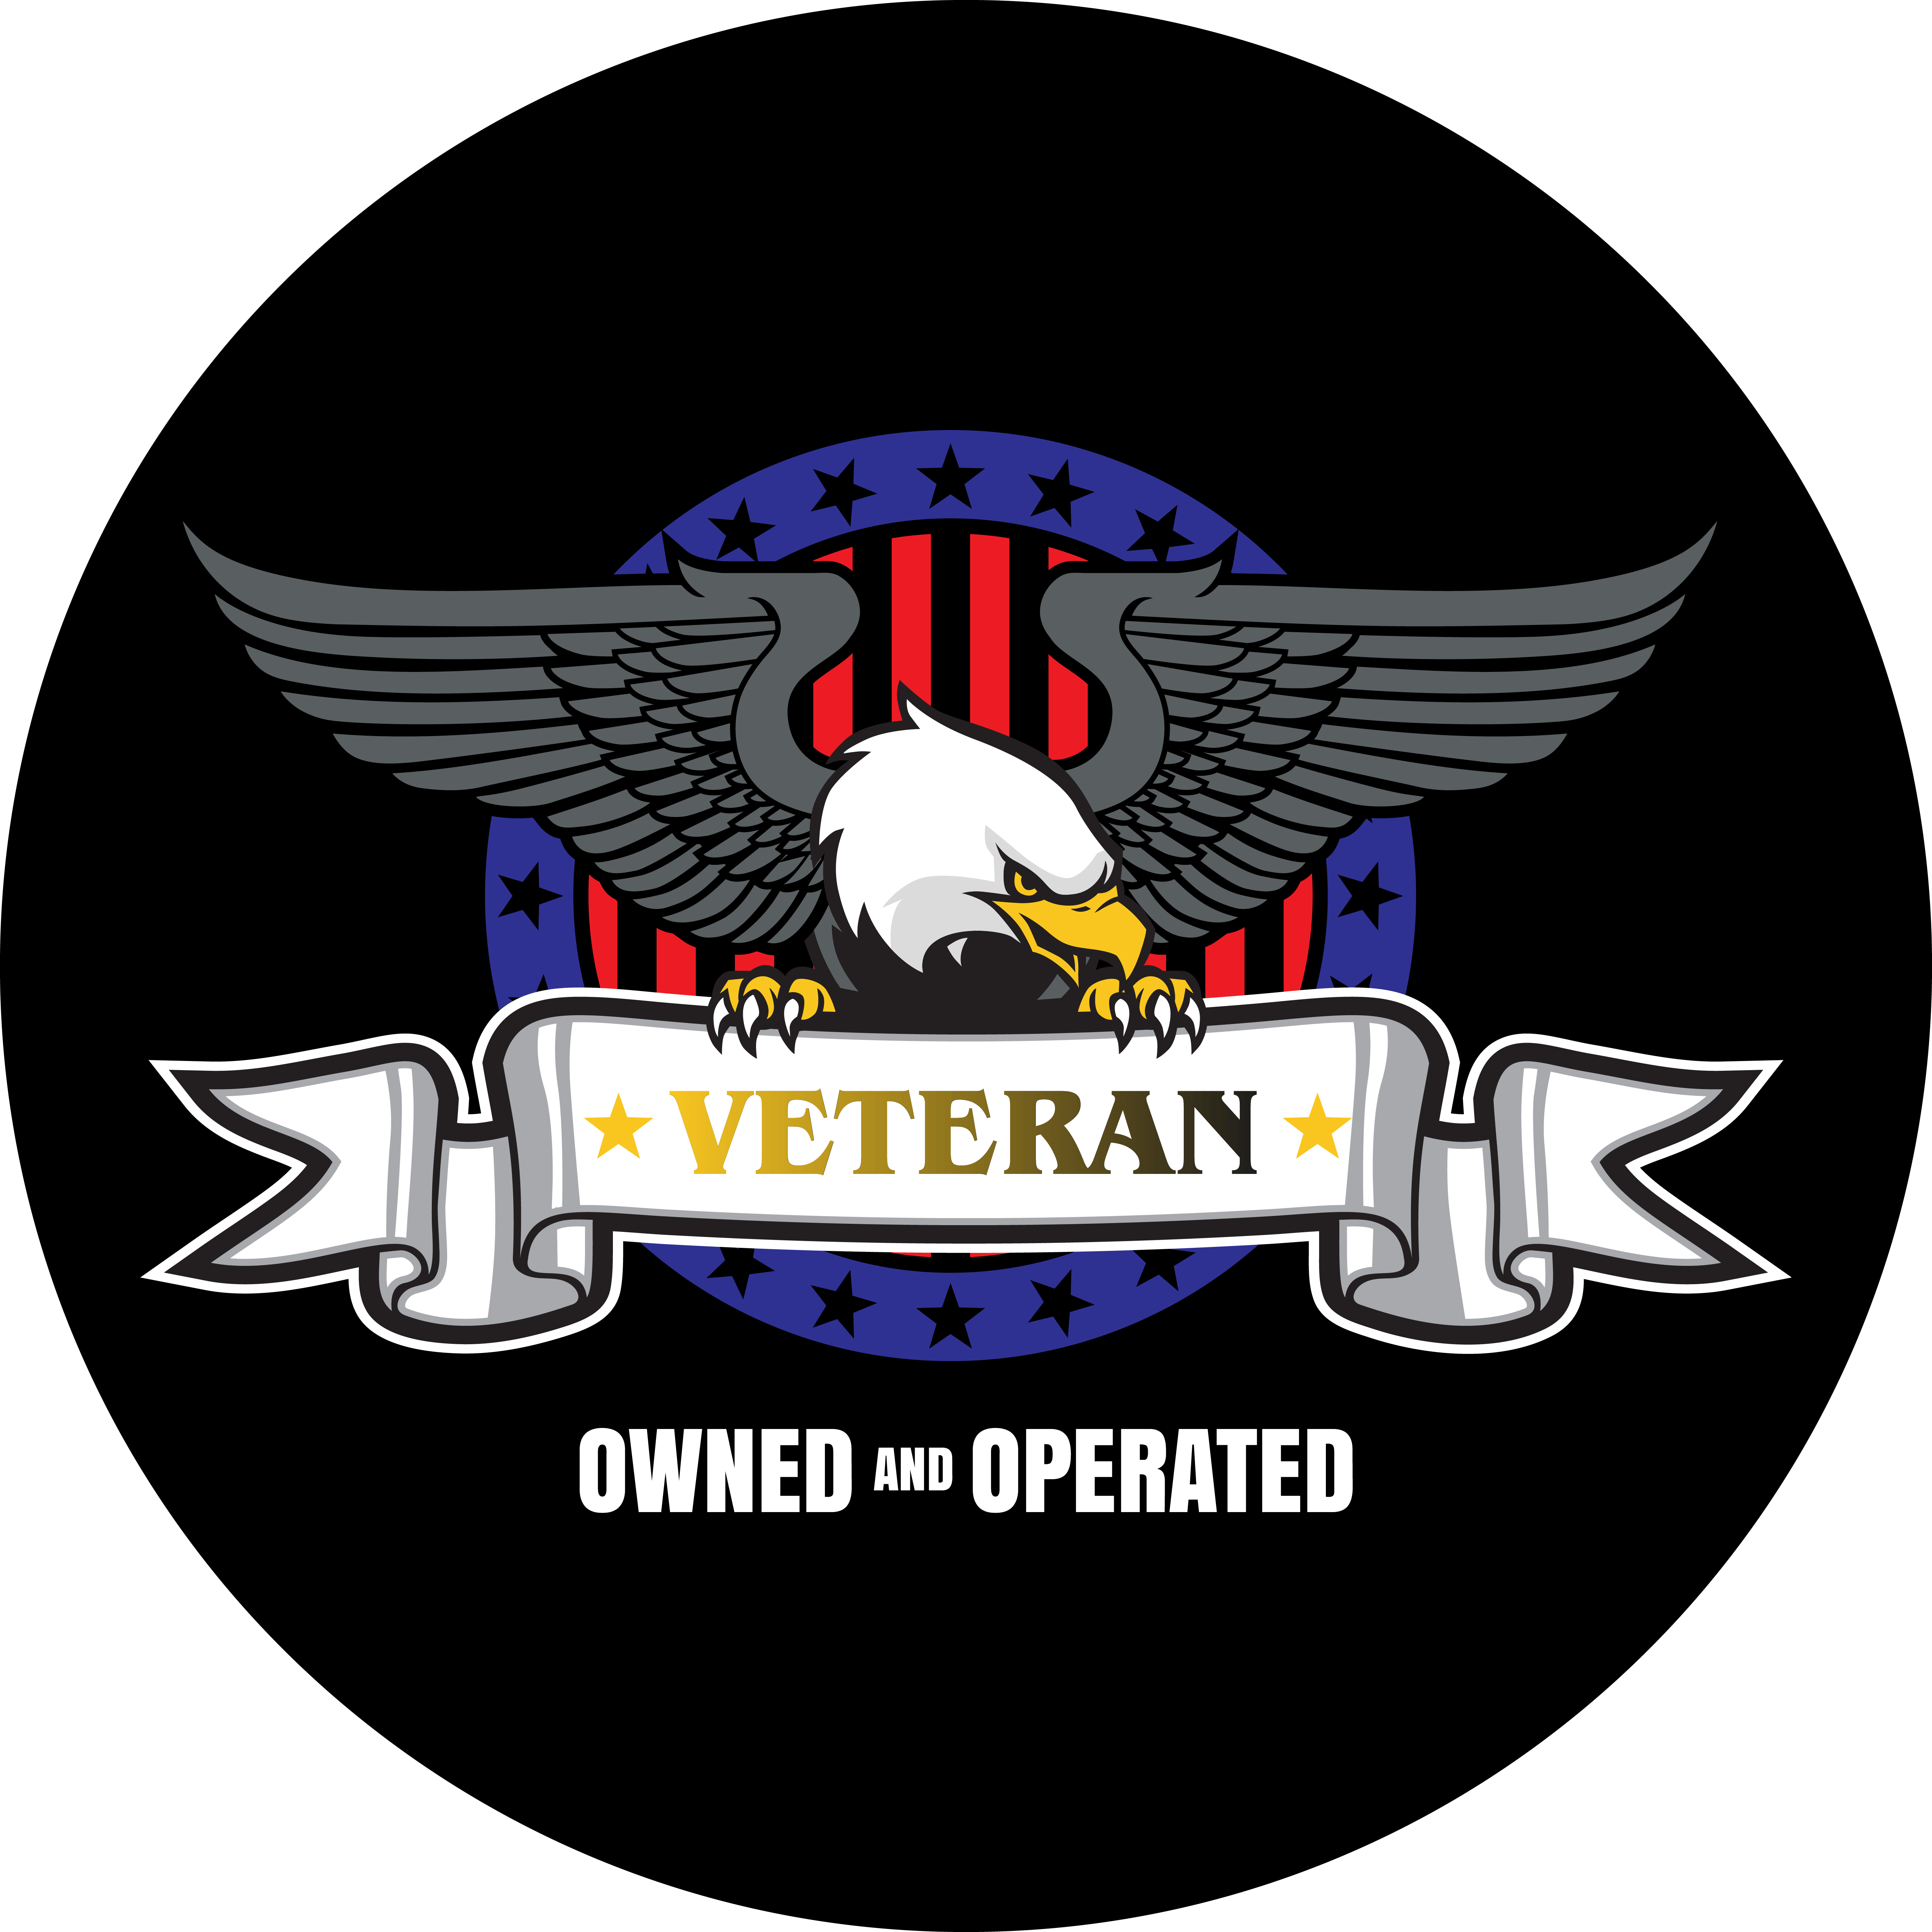 Veteran Owned and Operated.